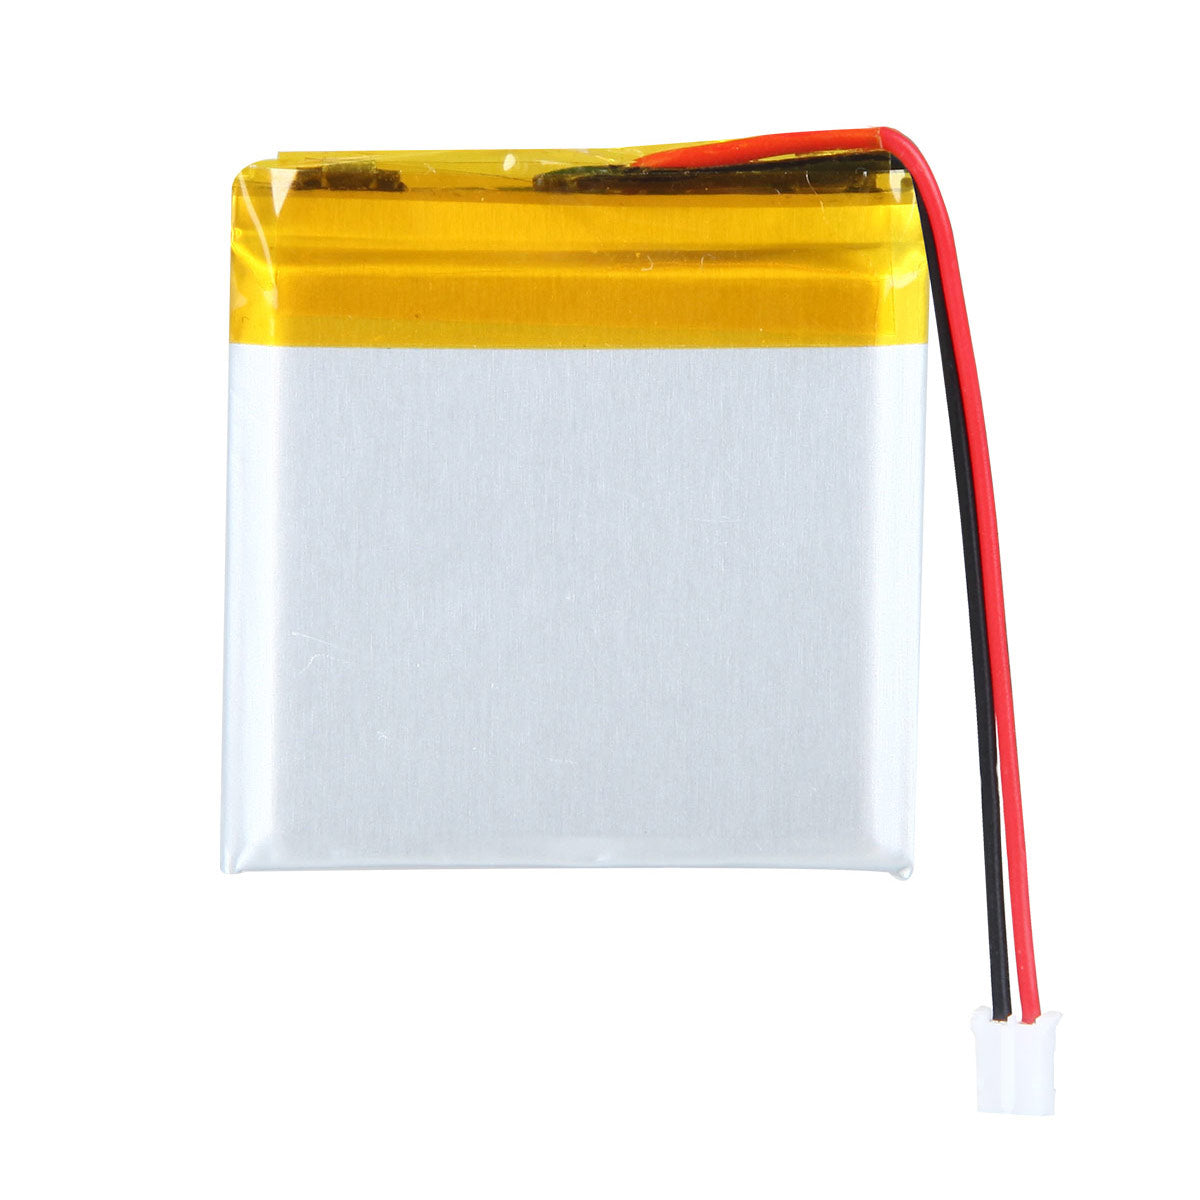 3.7V 1100mAh 604040 Rechargeable Lithium Polymer ion Battery Pack